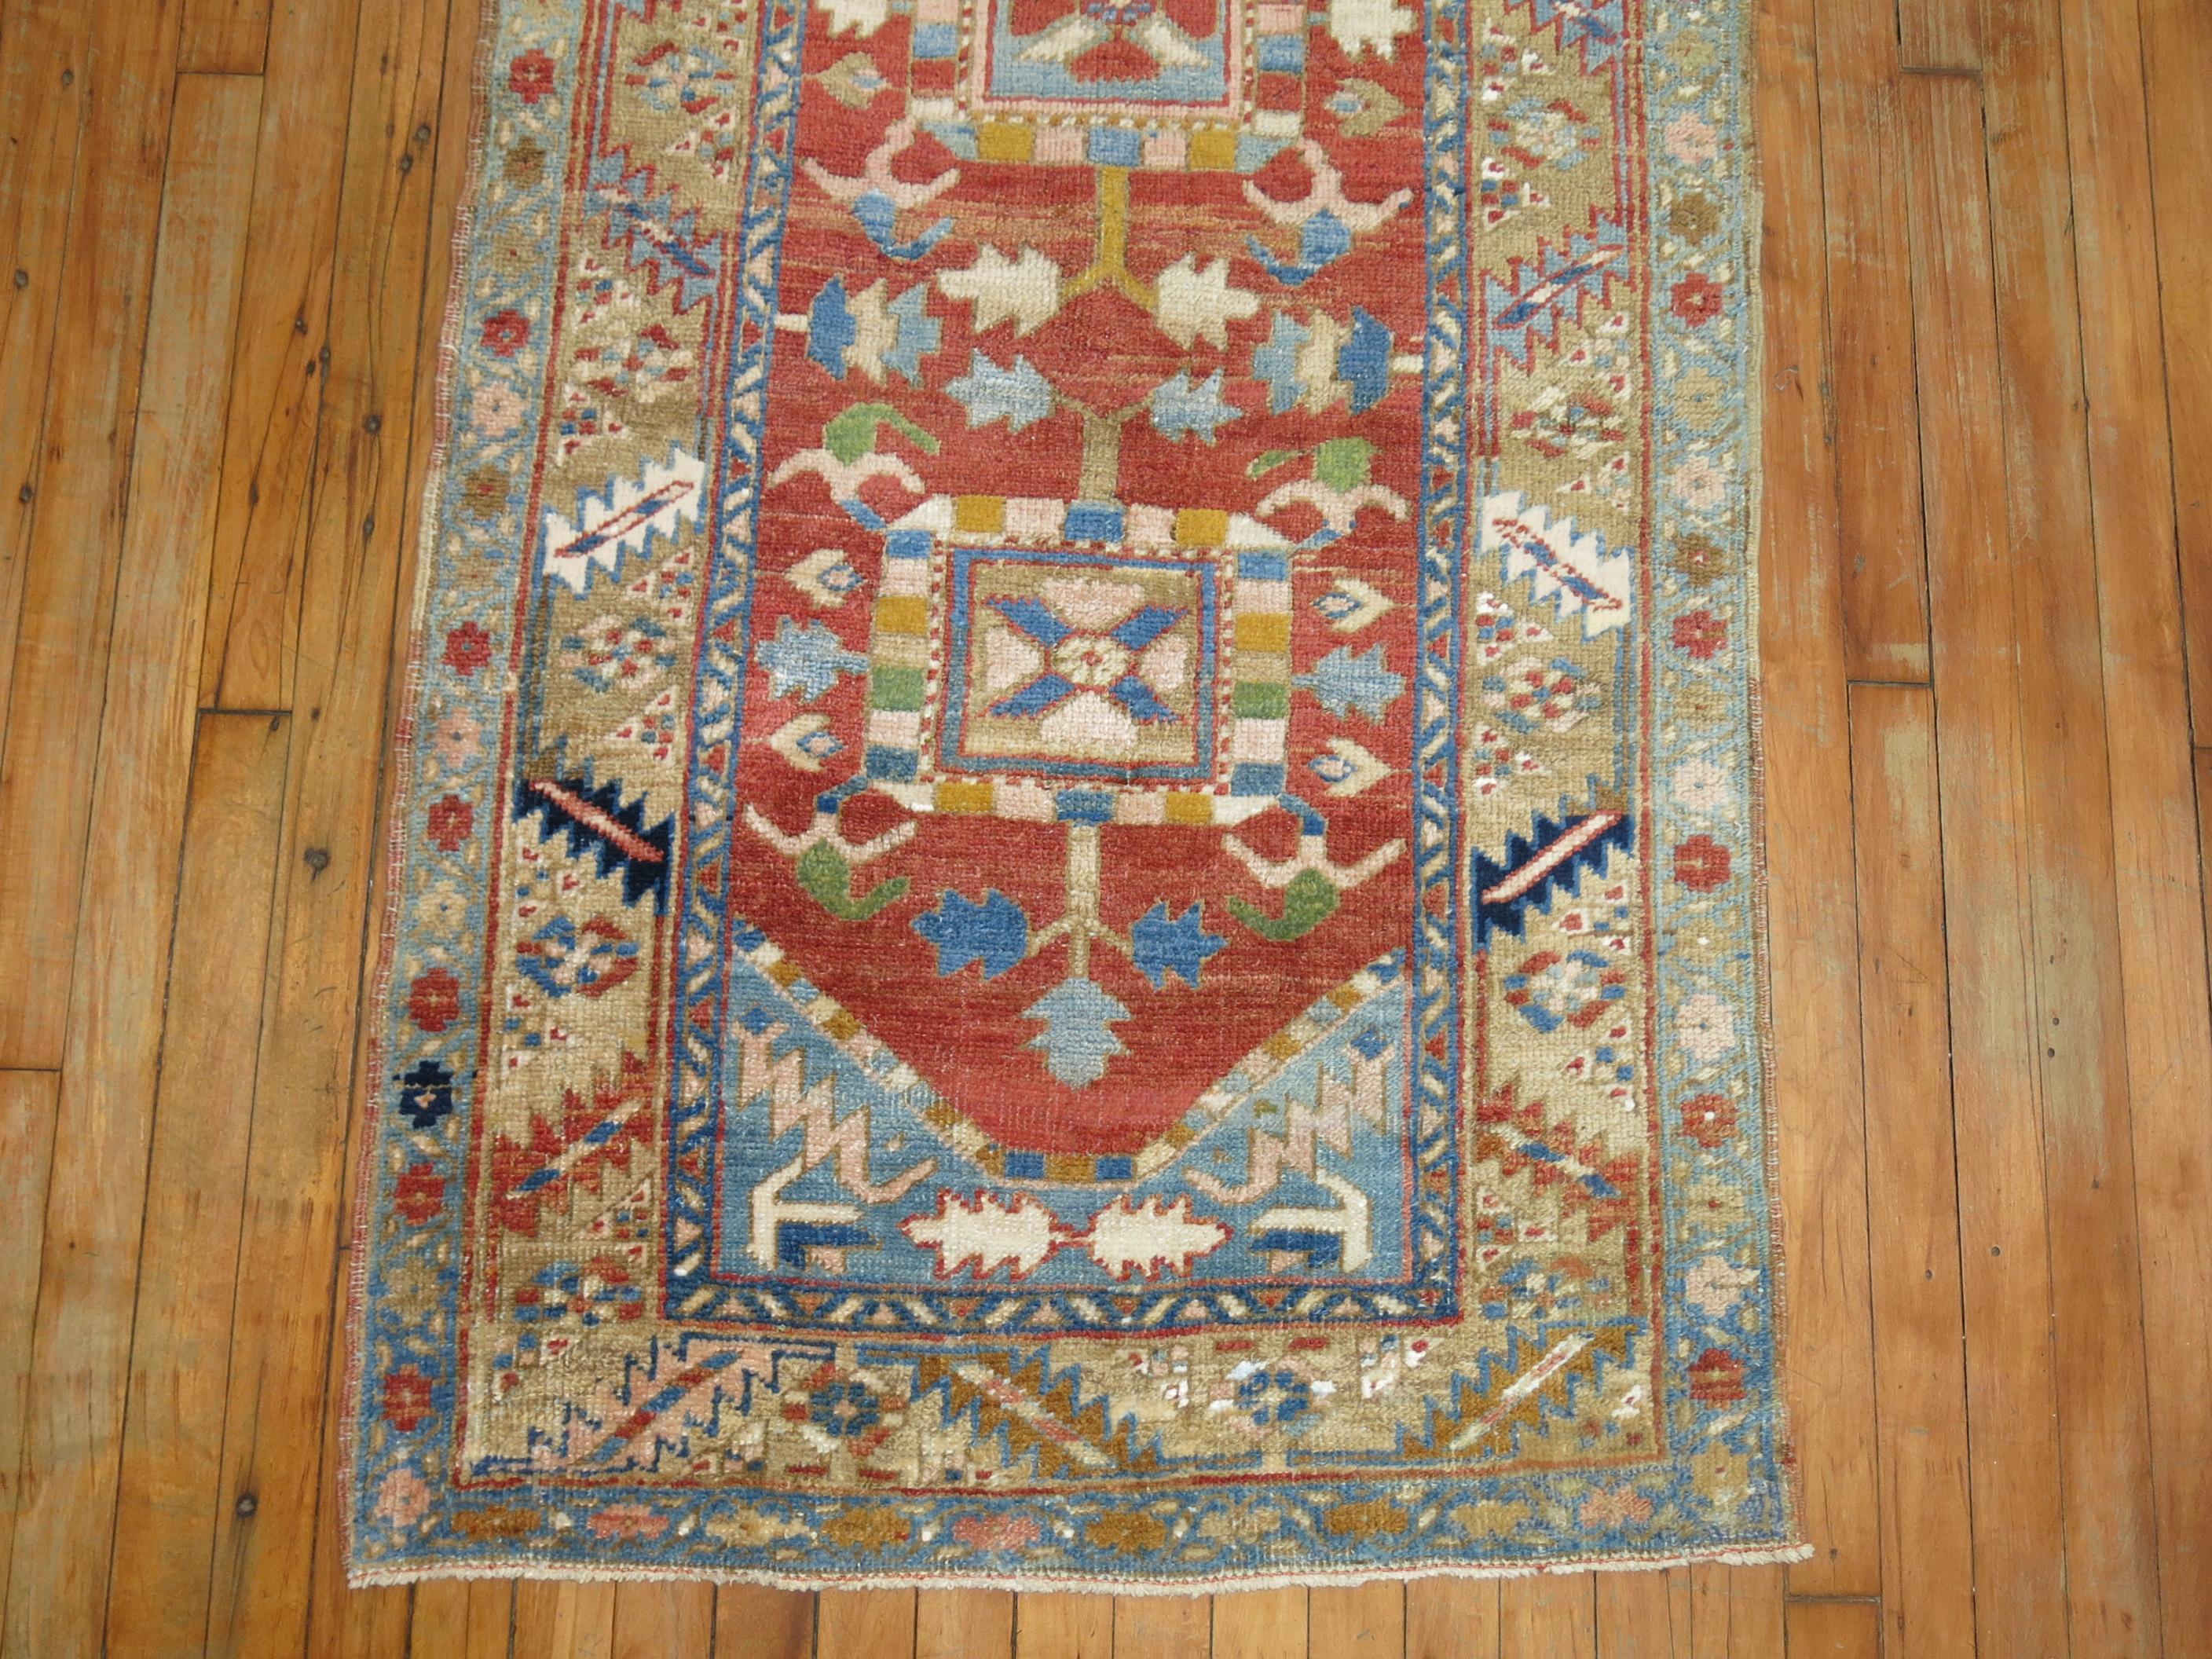 A one of a kind decorative antique Persian Heriz runner.

Measures: 2'10'' x 17'5''.

With distinctive large-scale motifs and a wide ranging palette of warm colors, the antique Heriz carpet is probably the most popular of the Persian village